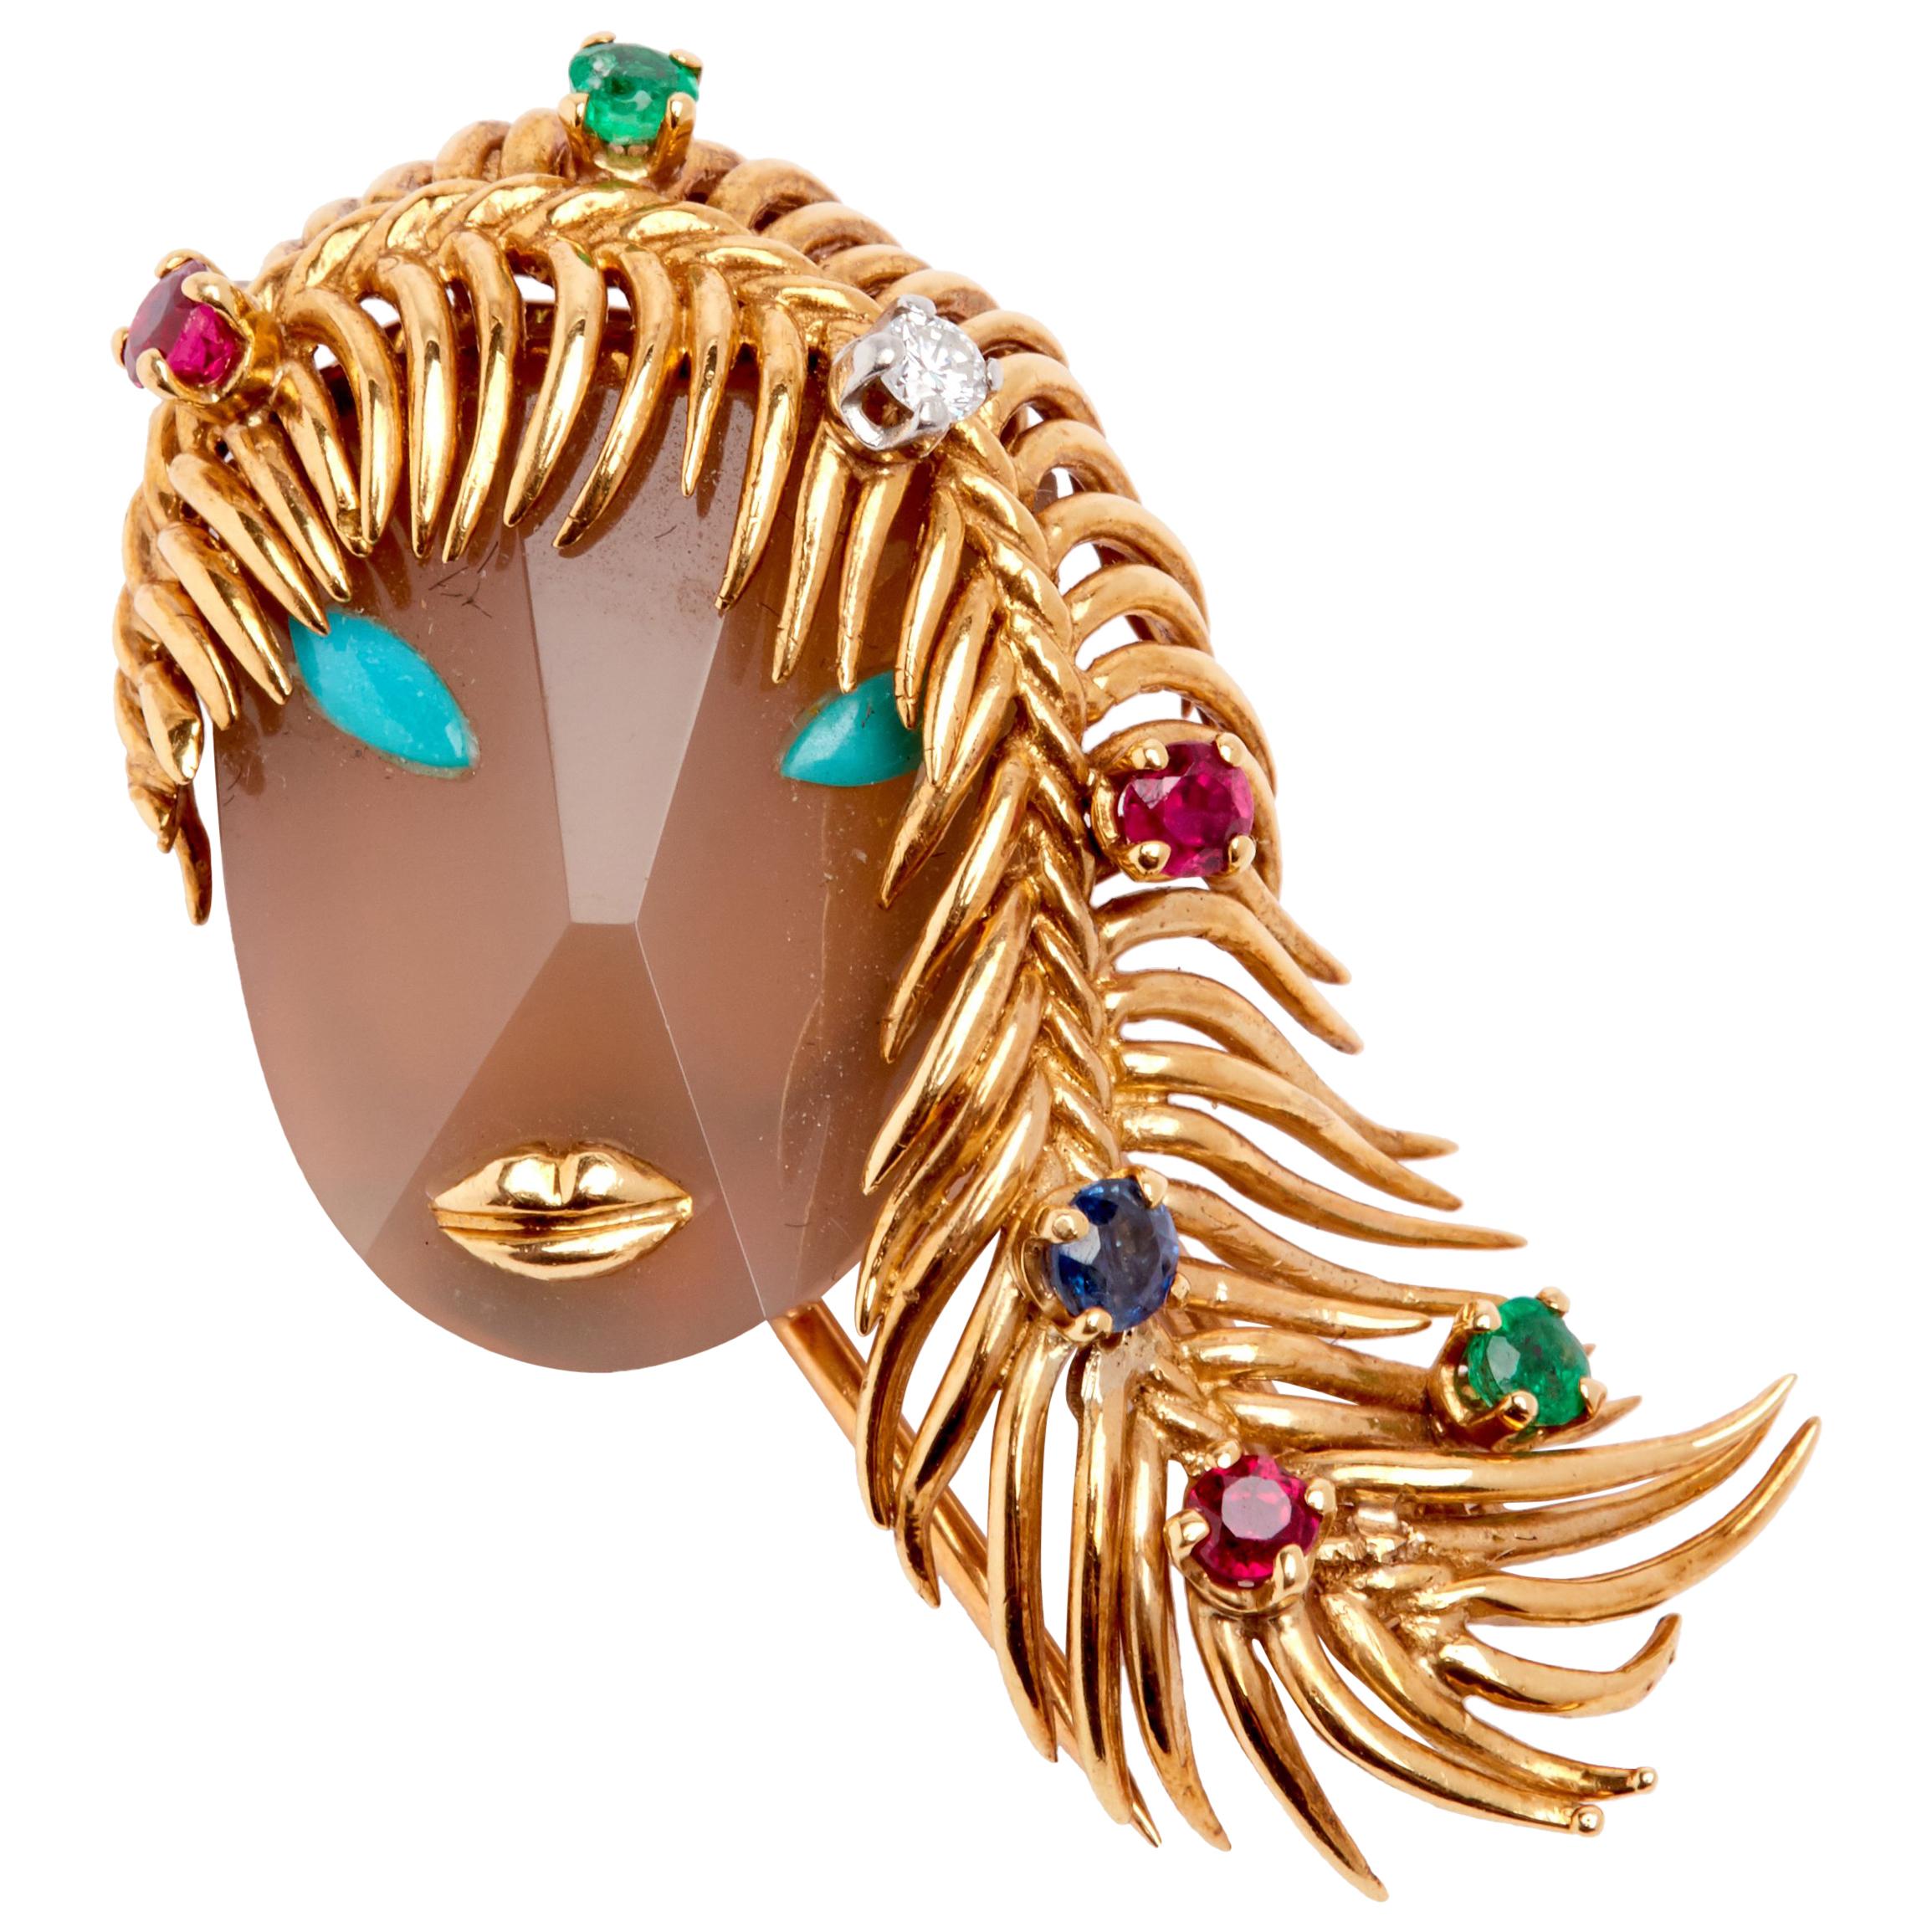 Ladies Face 18 Karat YG Ruby, Sapphire and Emerald Hardstone Turquoise Brooch